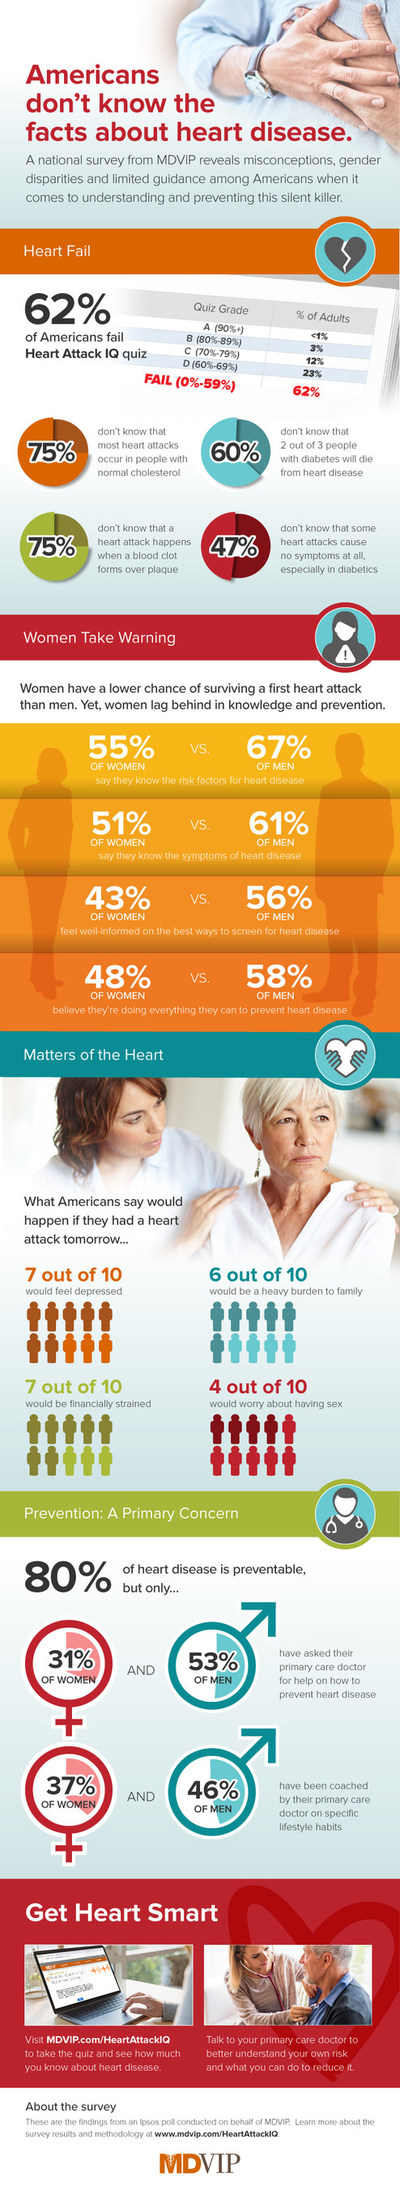 Heart Attack IQ Survey Infographic: A national study from MDVIP and Ipsos reveals misconceptions, gender disparities and limited medical guidance among Americans when it comes to understanding and preventing heart disease.